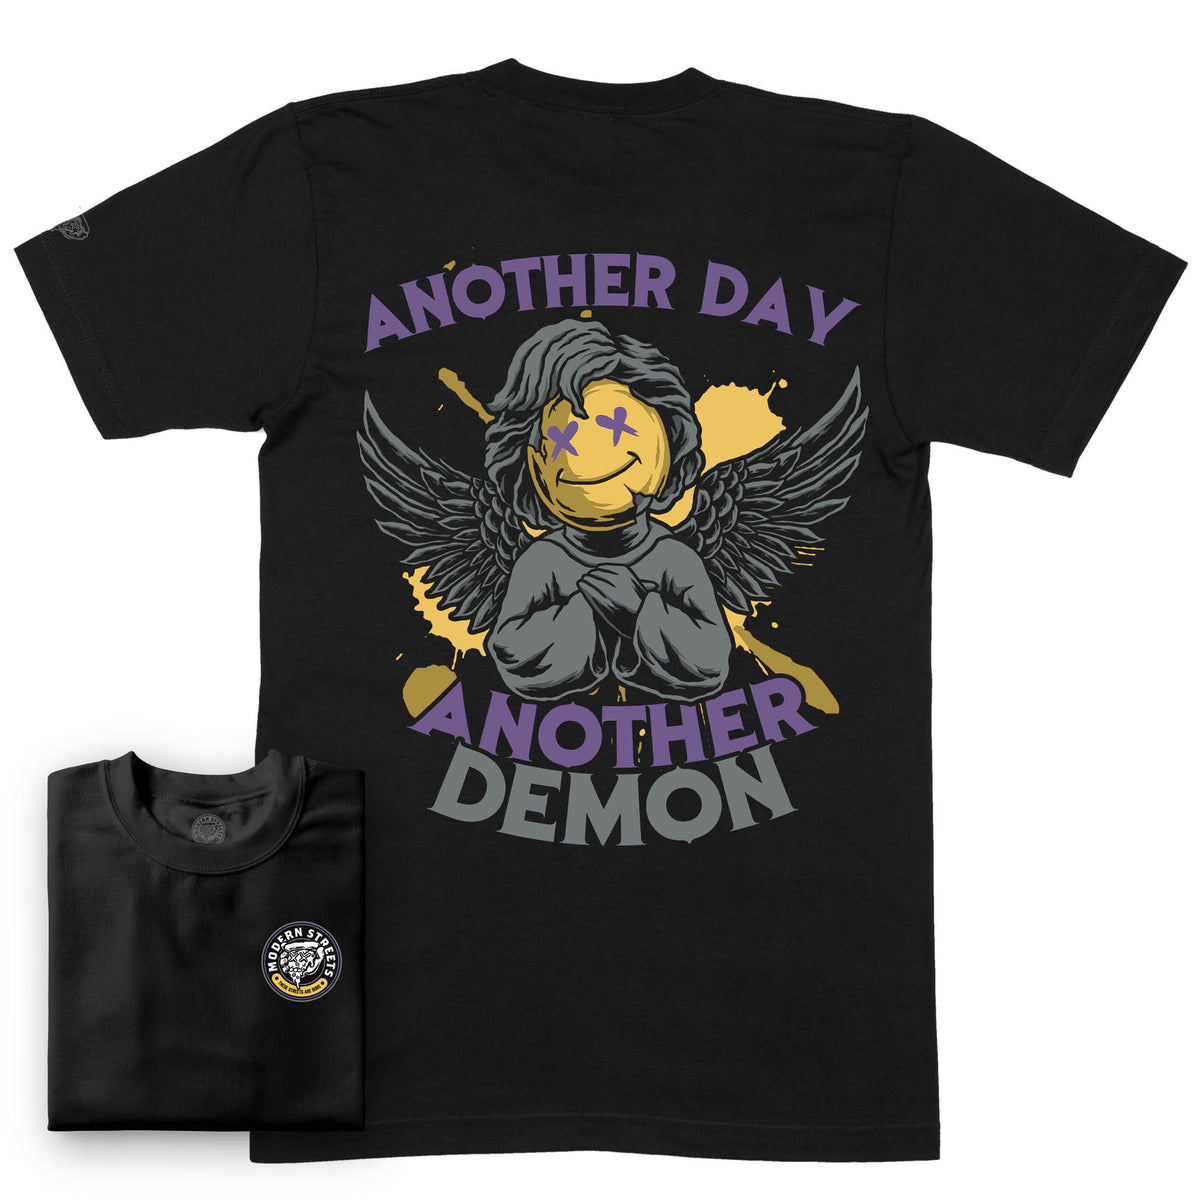 Another Day, Another Demon Short-Sleeve T-Shirt